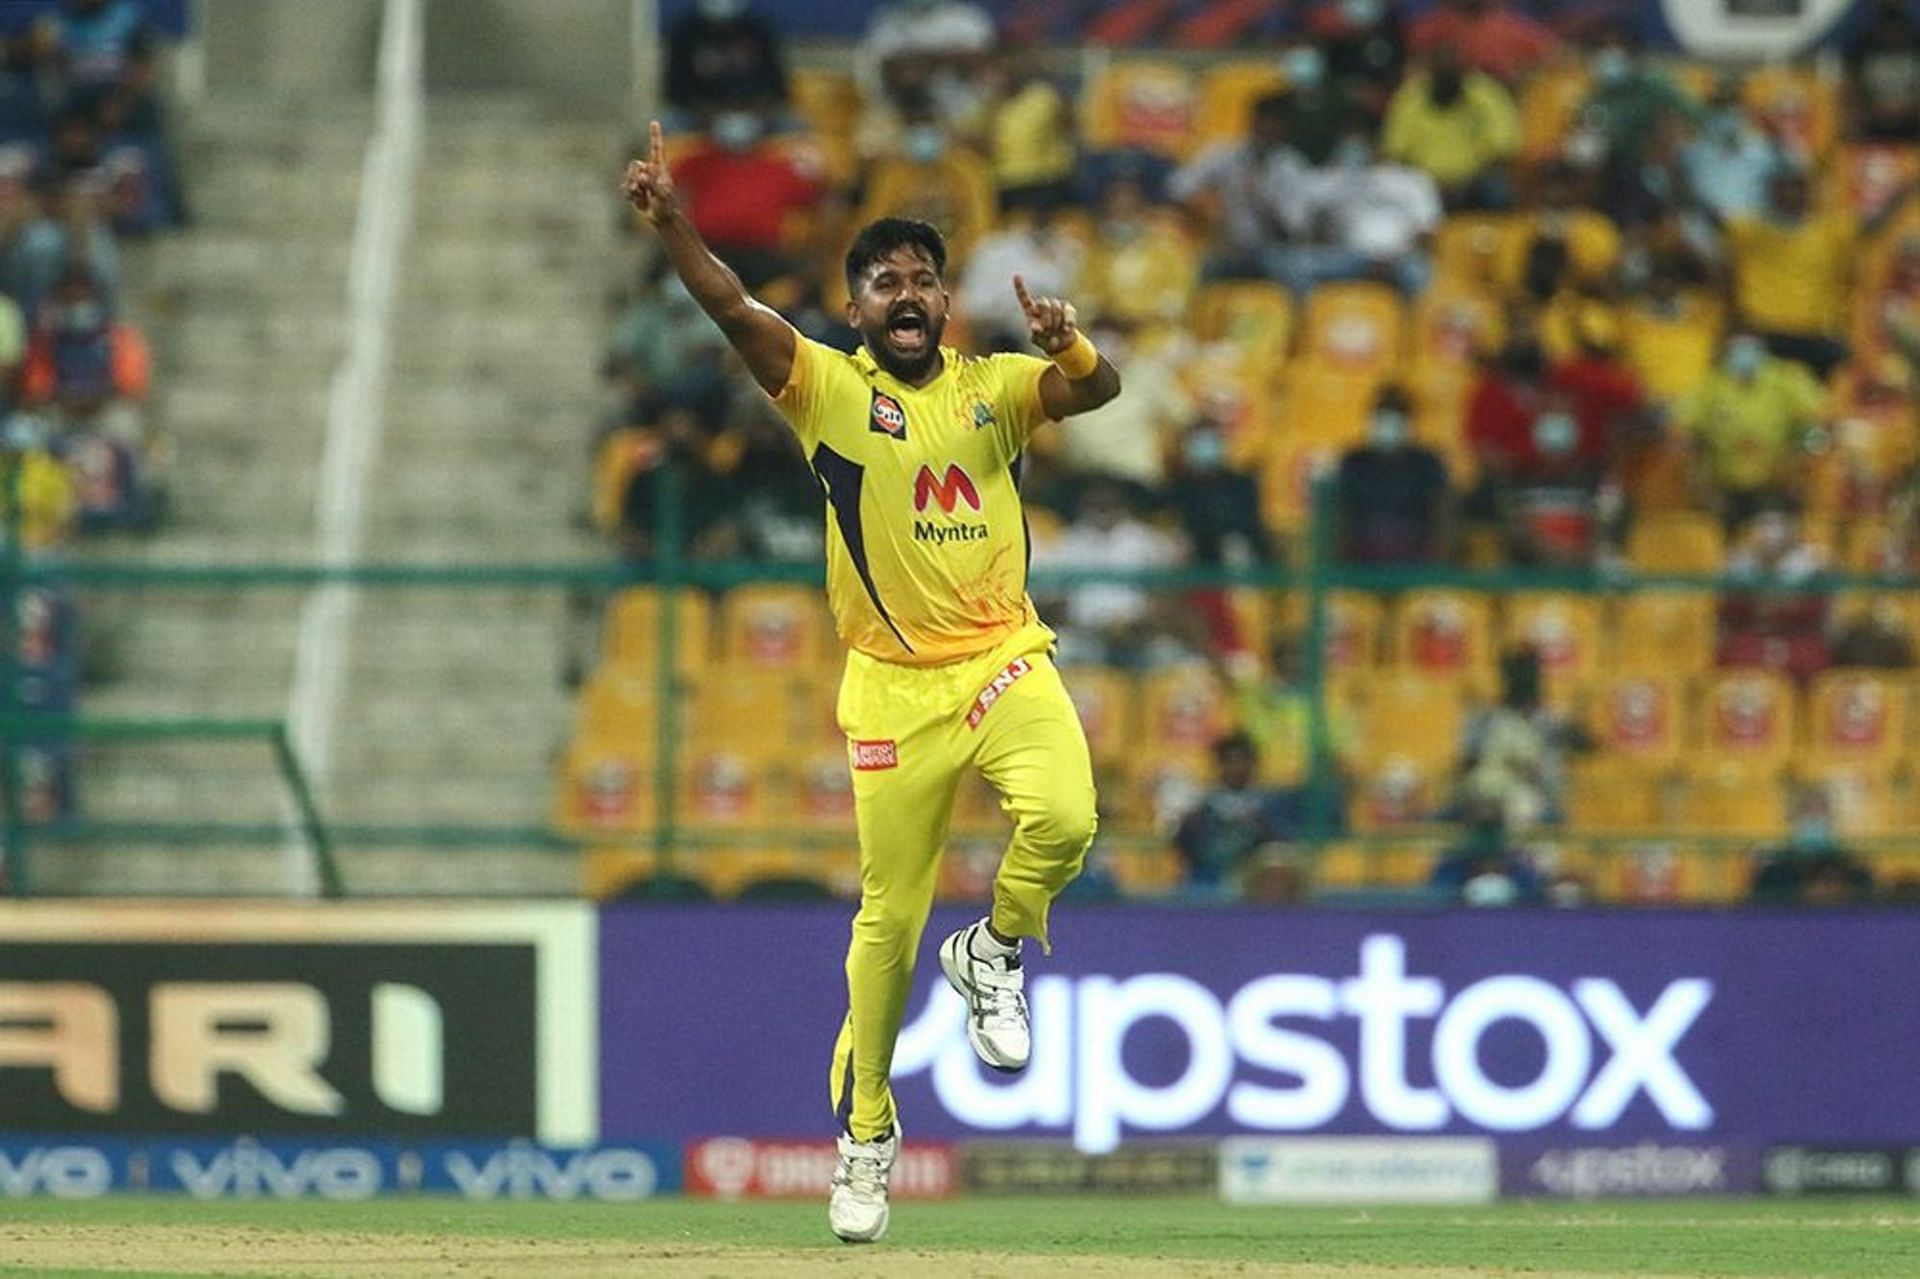 KM Asif will hold the aces for Kerala in the upcoming Syed Mushtaq Ali Trophy 2021 (Picture Credits: Vipin Pawar/Sportzpics/IPL)